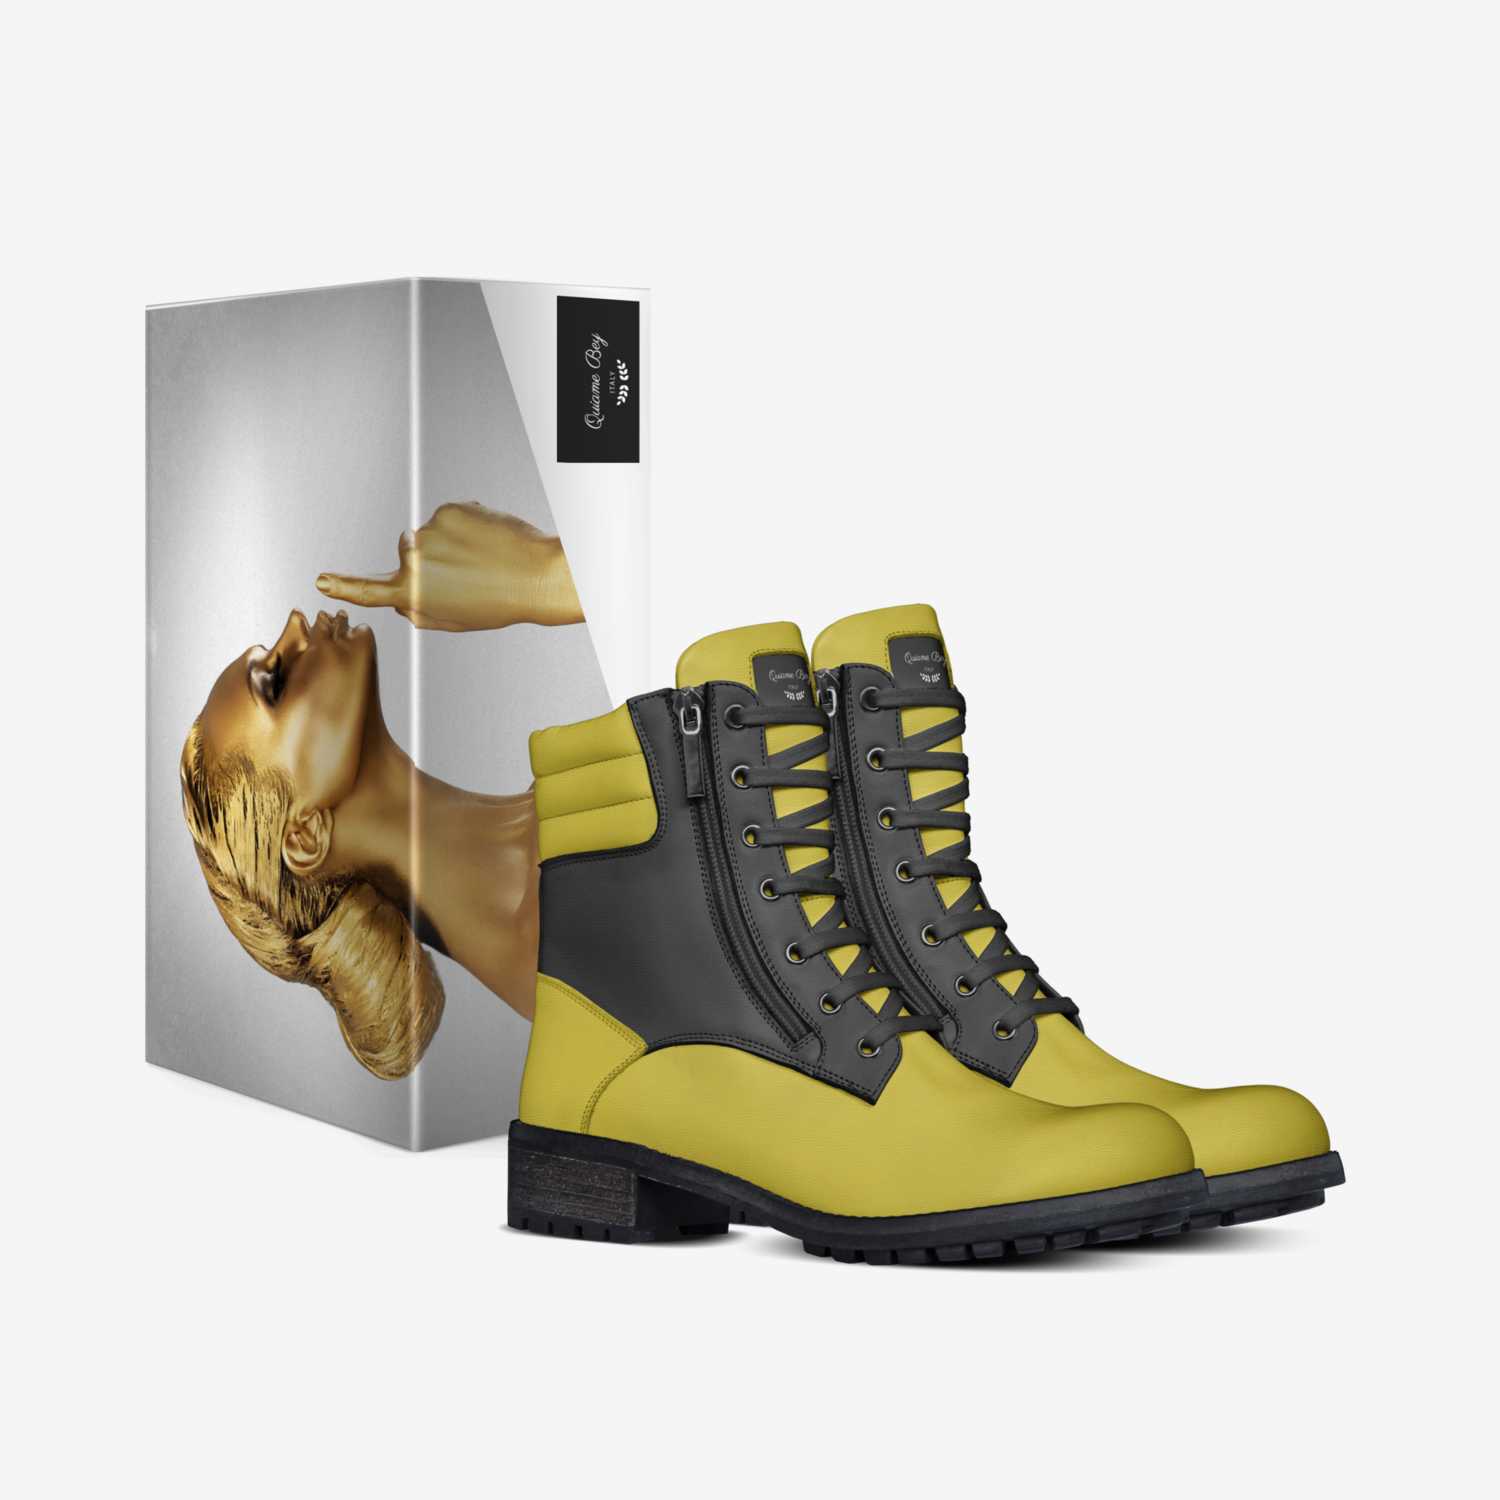 Quiame Bey custom made in Italy shoes by Quiame Bey | Box view